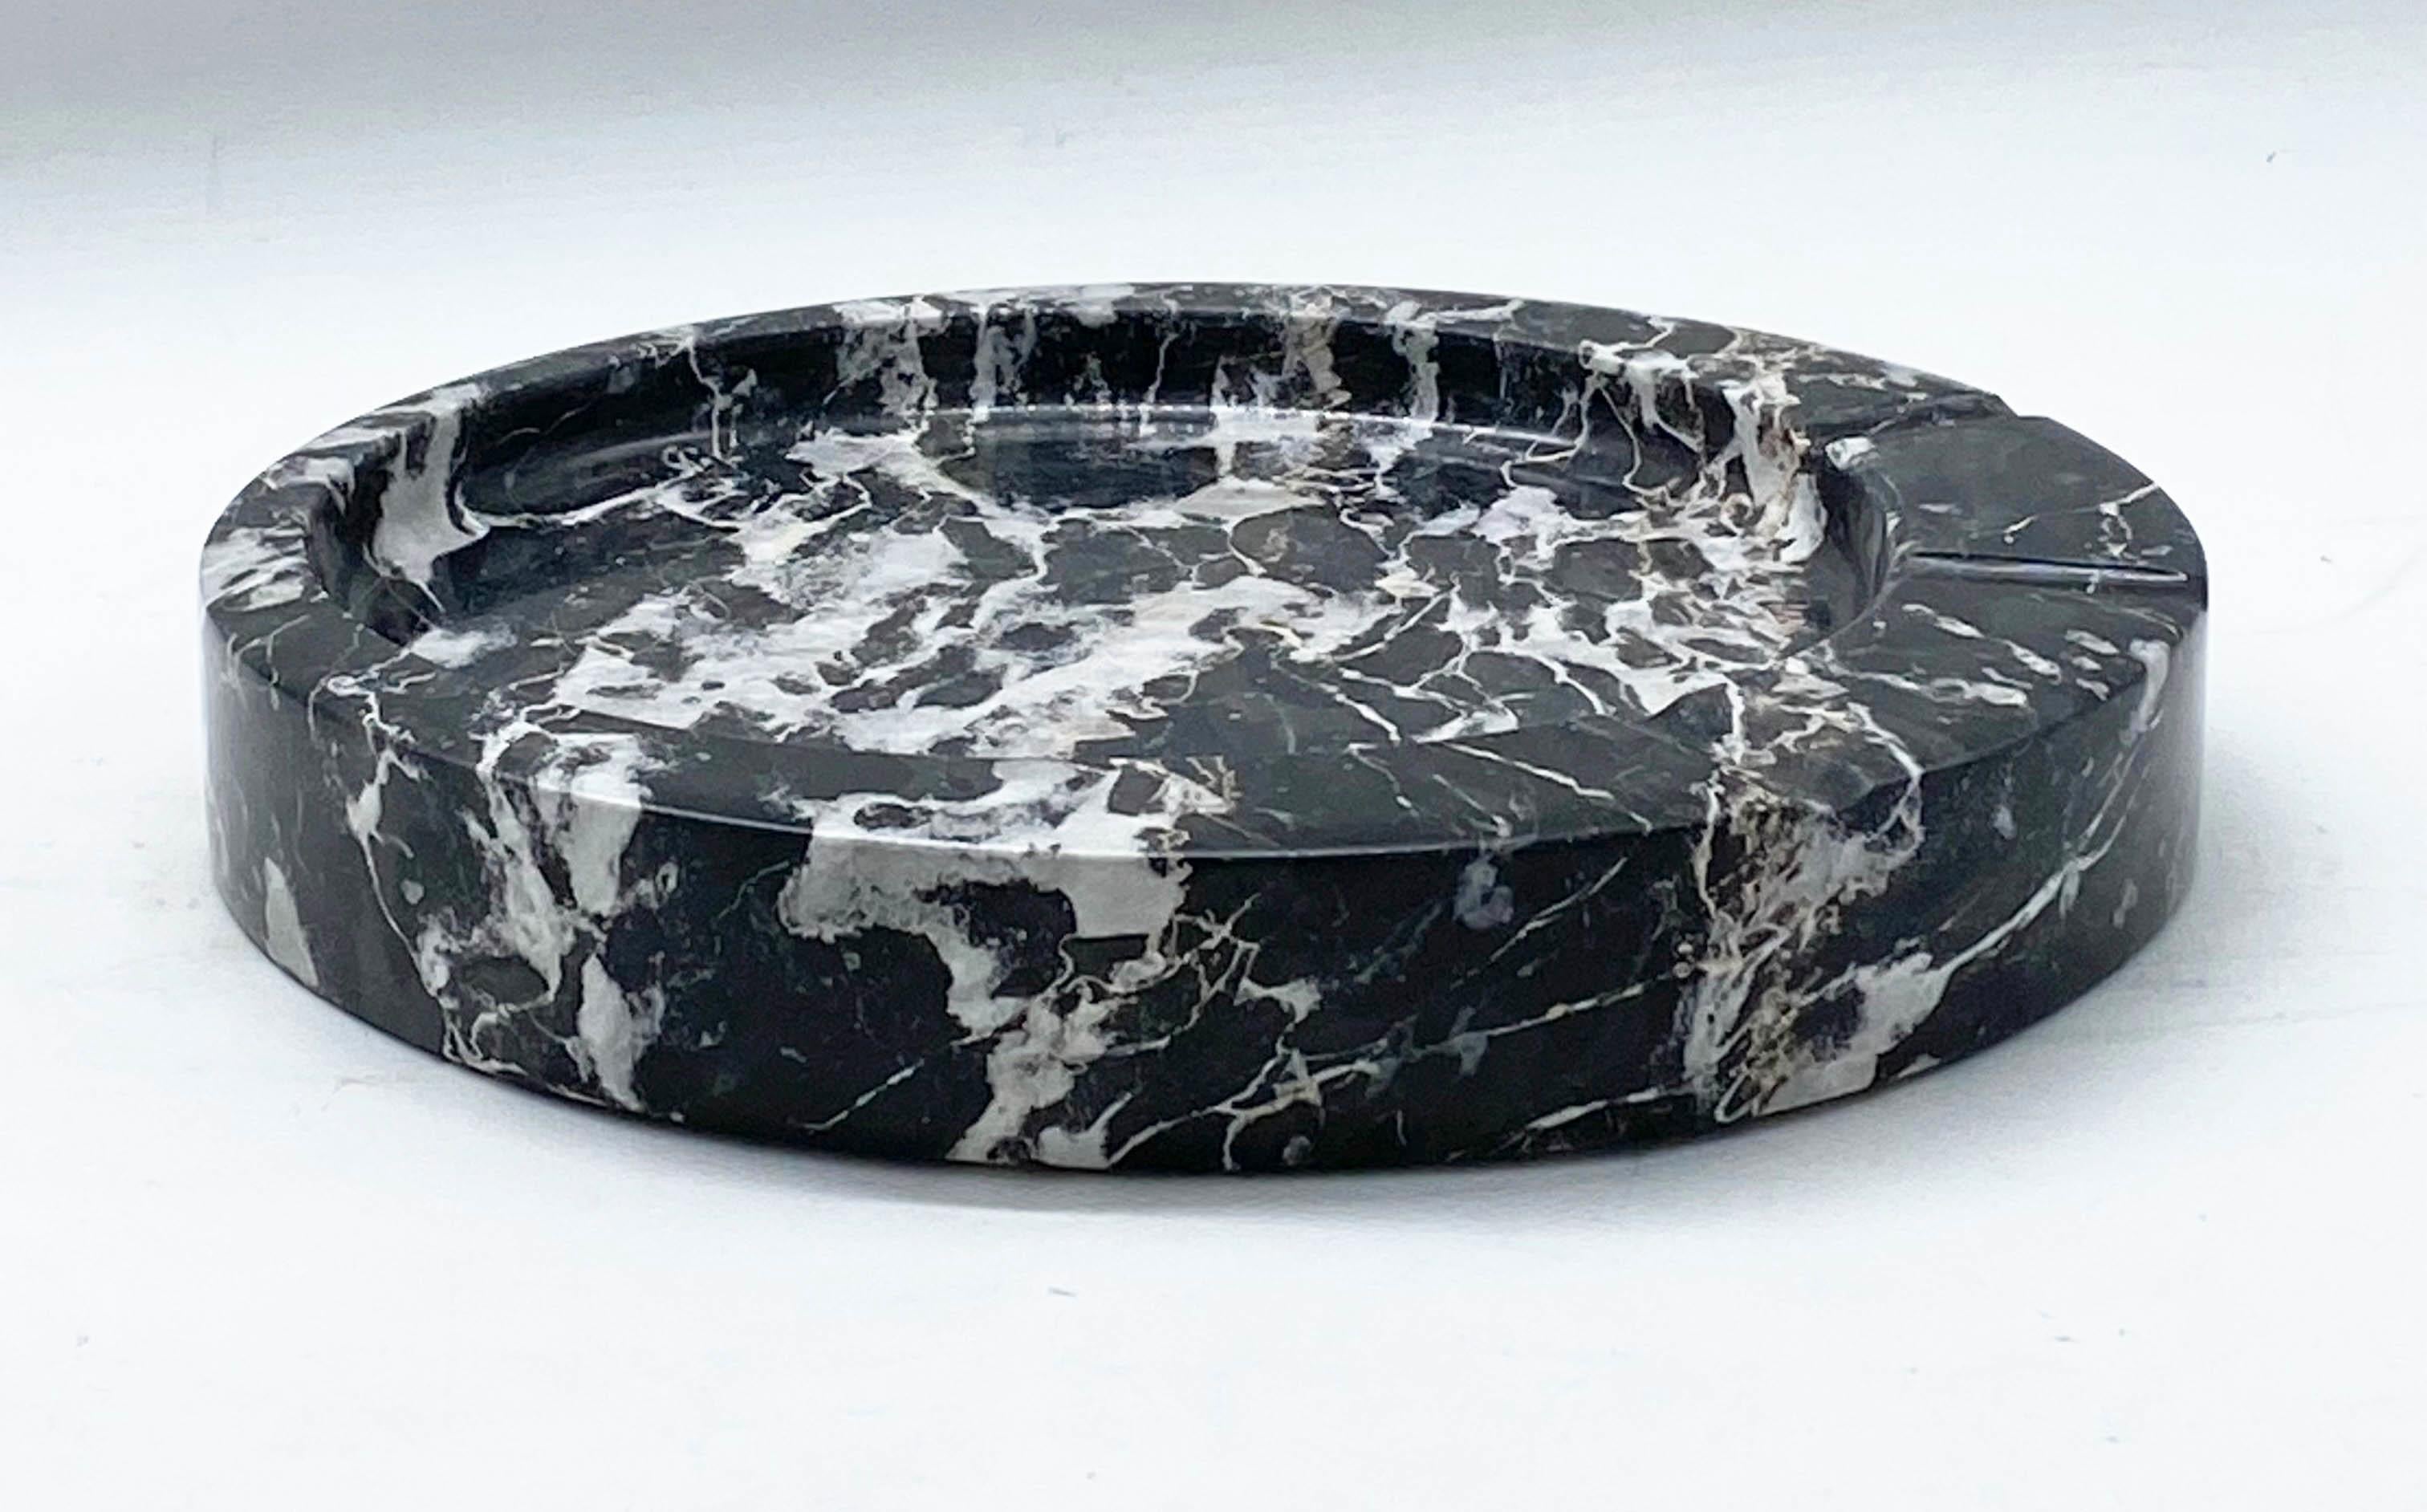 Beautiful roundbowl or ashtray in black marble and white veins designed by Sergio Asti for Up&Up.